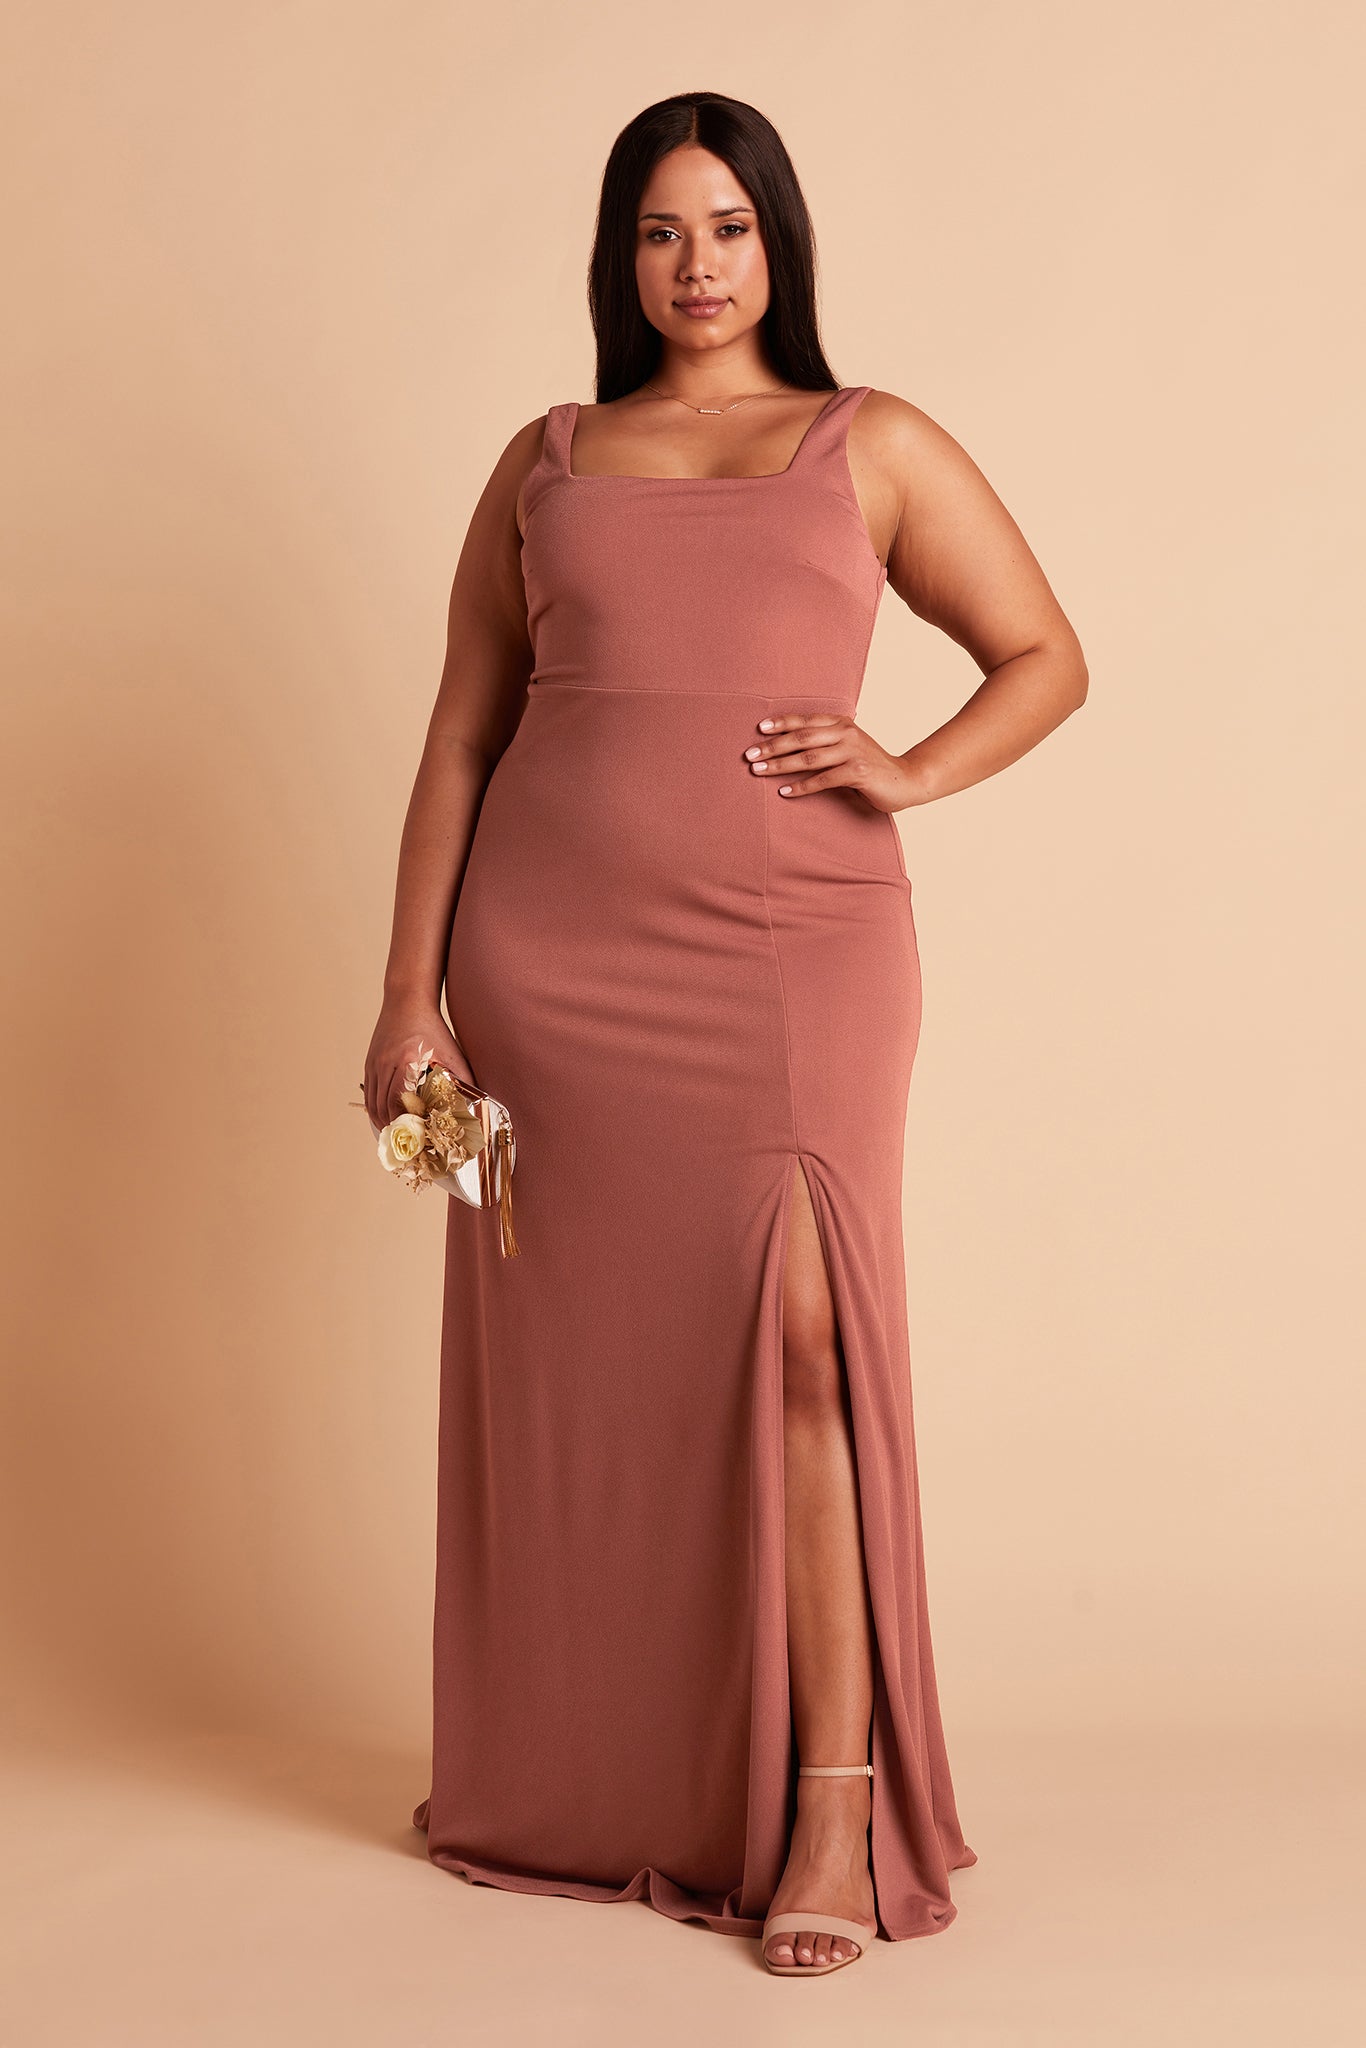 Alex convertible plus size bridesmaid dress with slit in desert rose crepe by Birdy Grey, front view